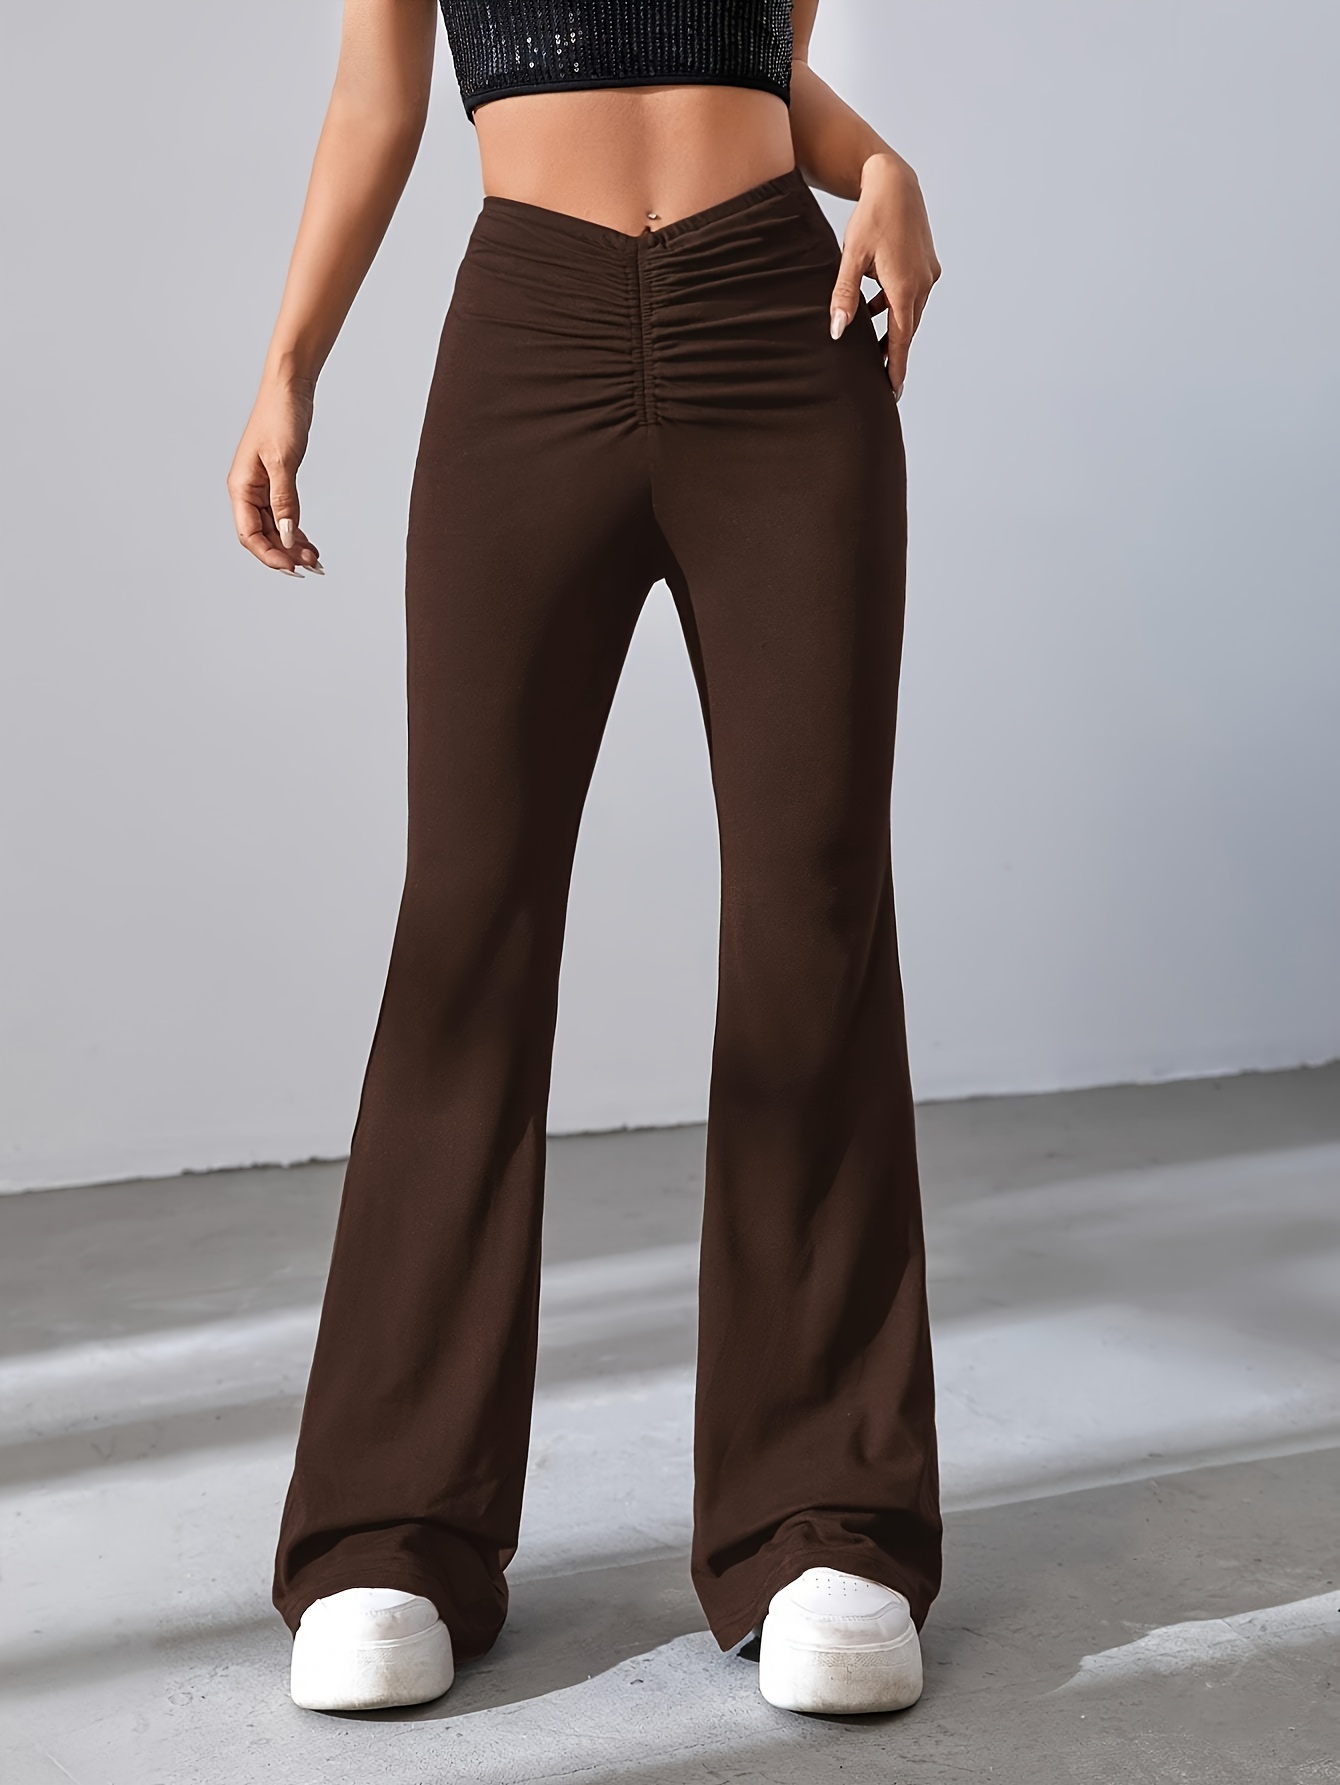 Best Brown Flare Leggings With FREE Shipping